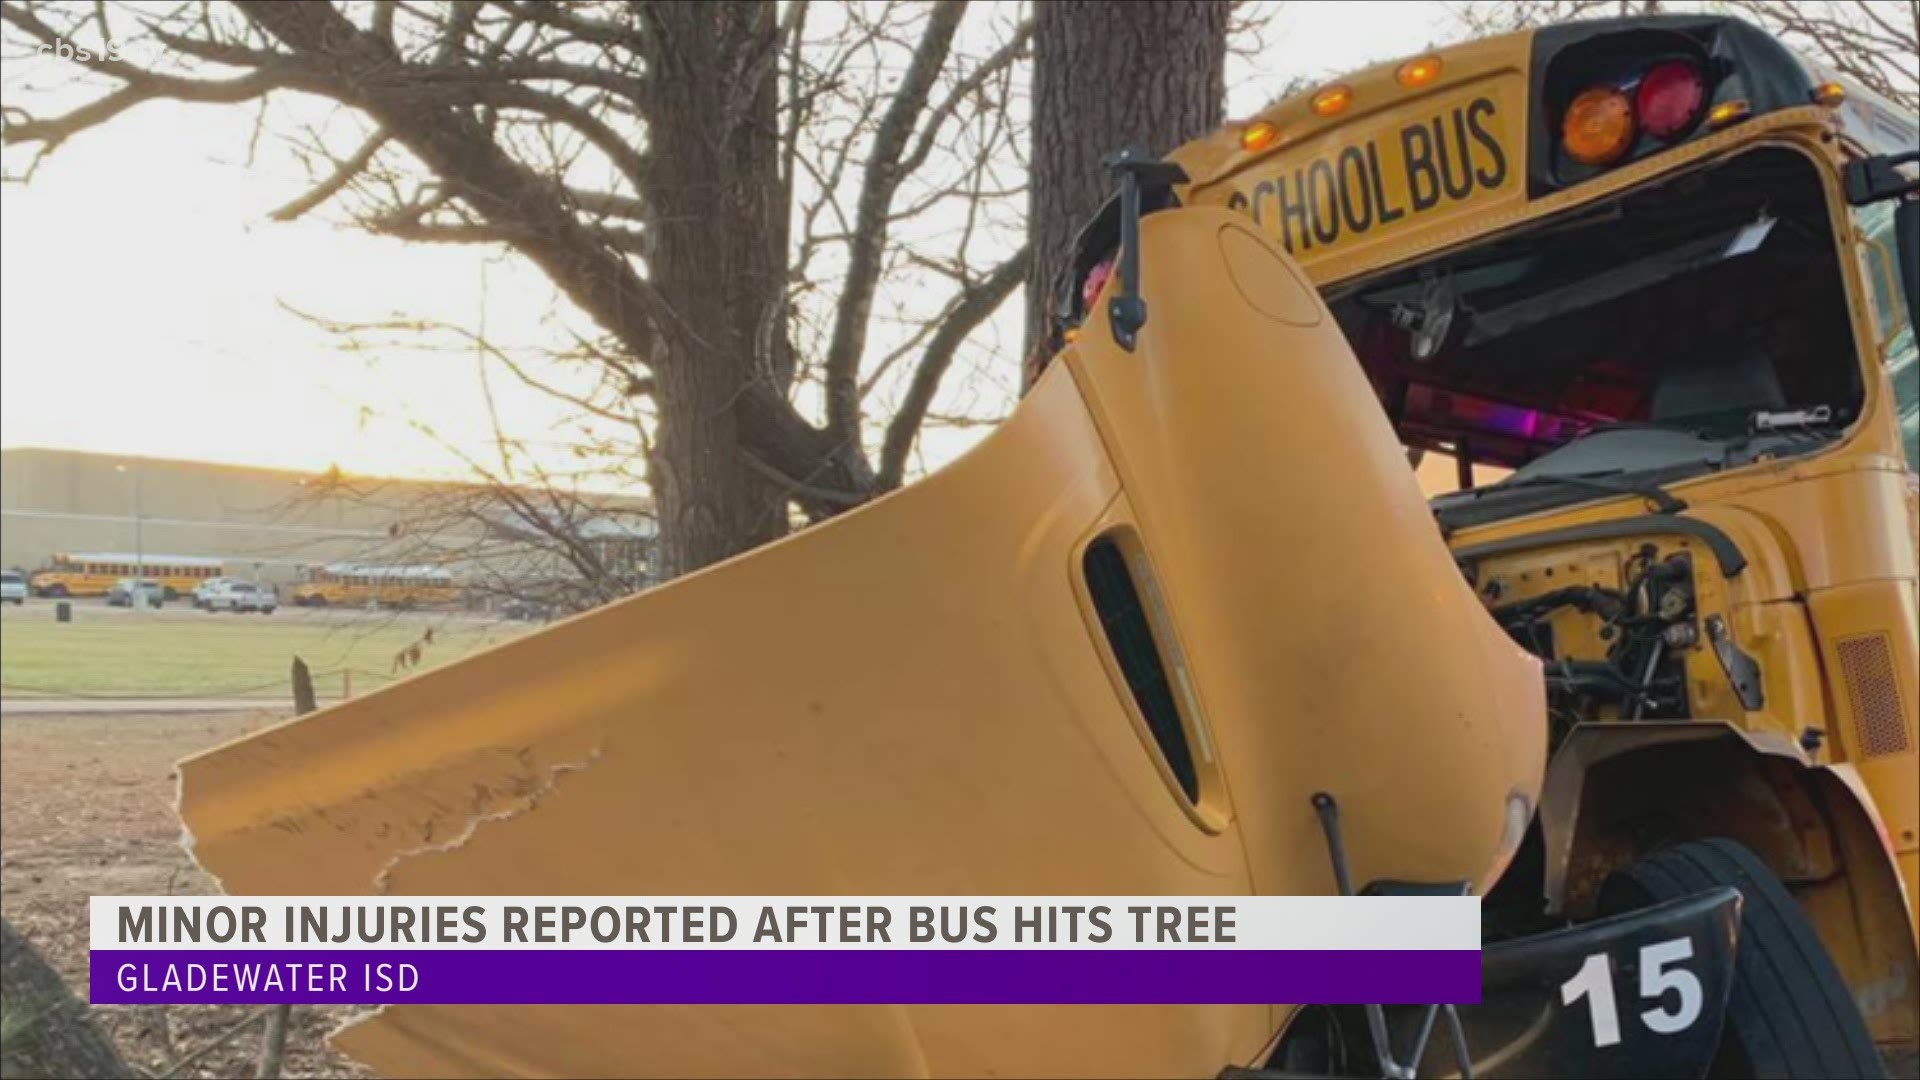 Injuries reported after Gladewater ISD bus hits tree cbs19 tv